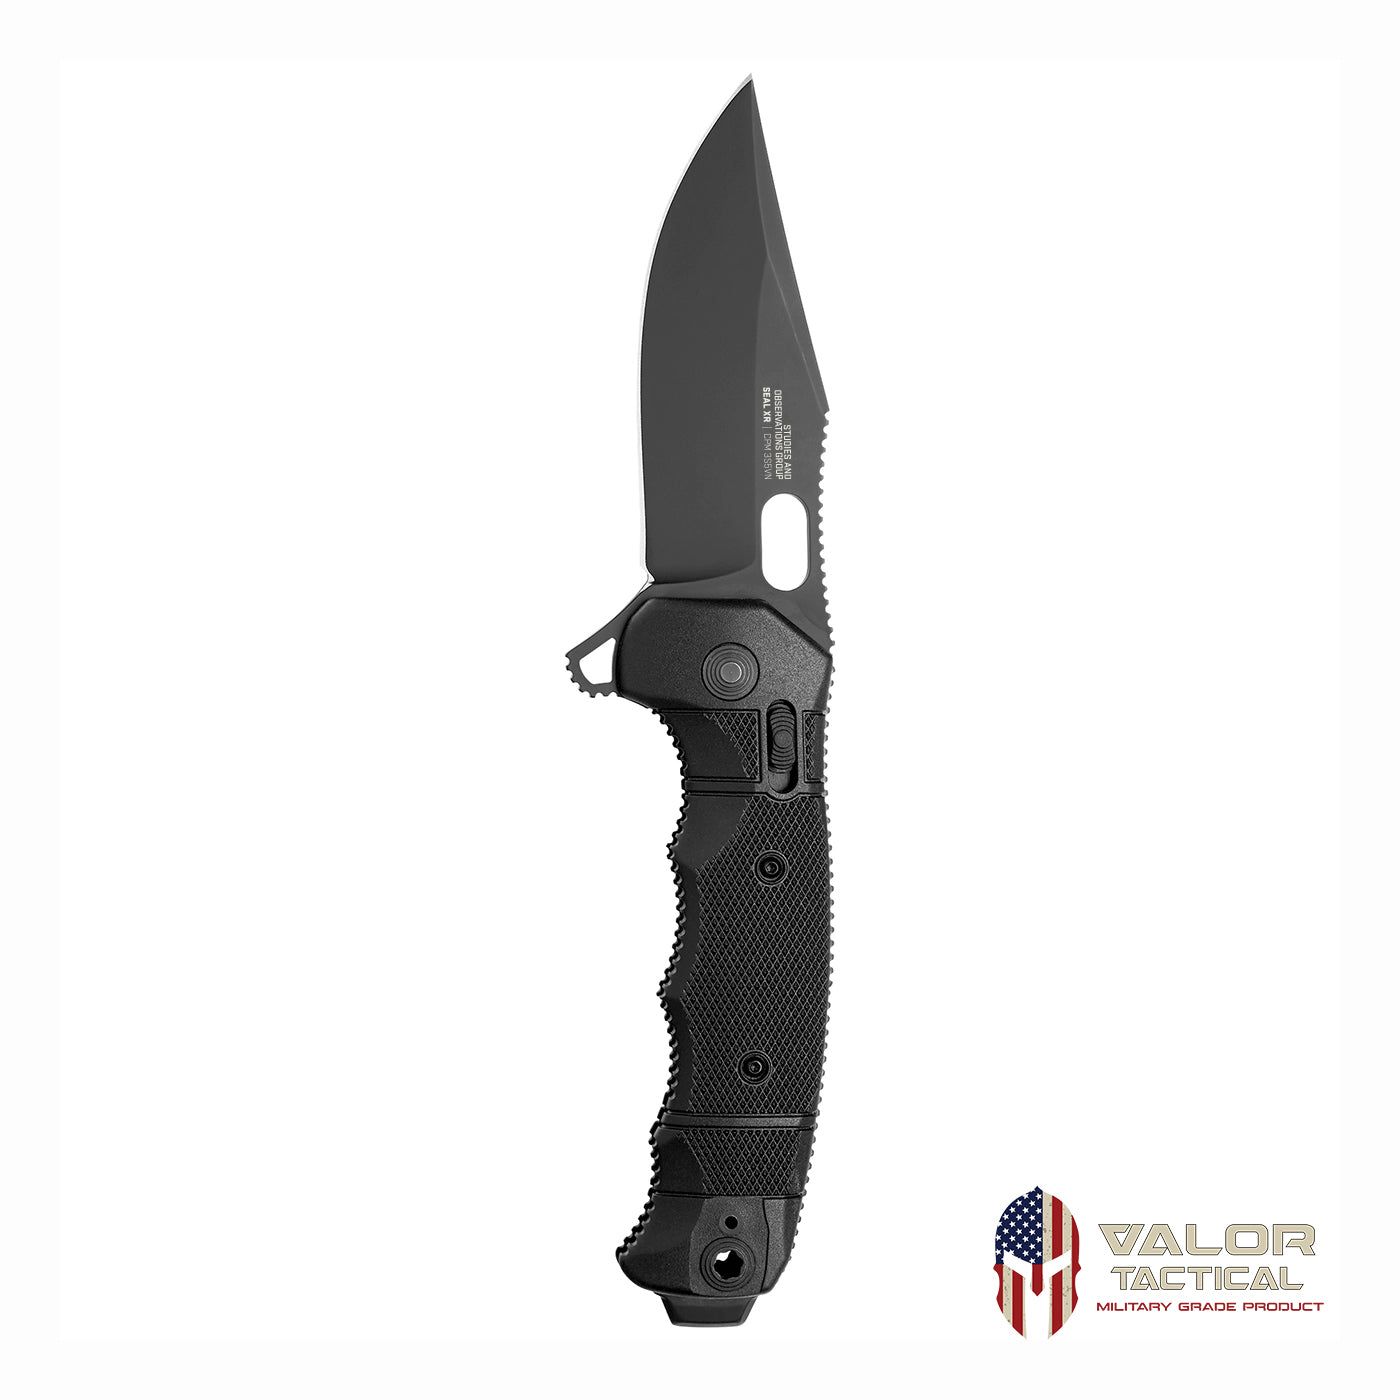 SOG - Seal XR - Clip Point - USA Made